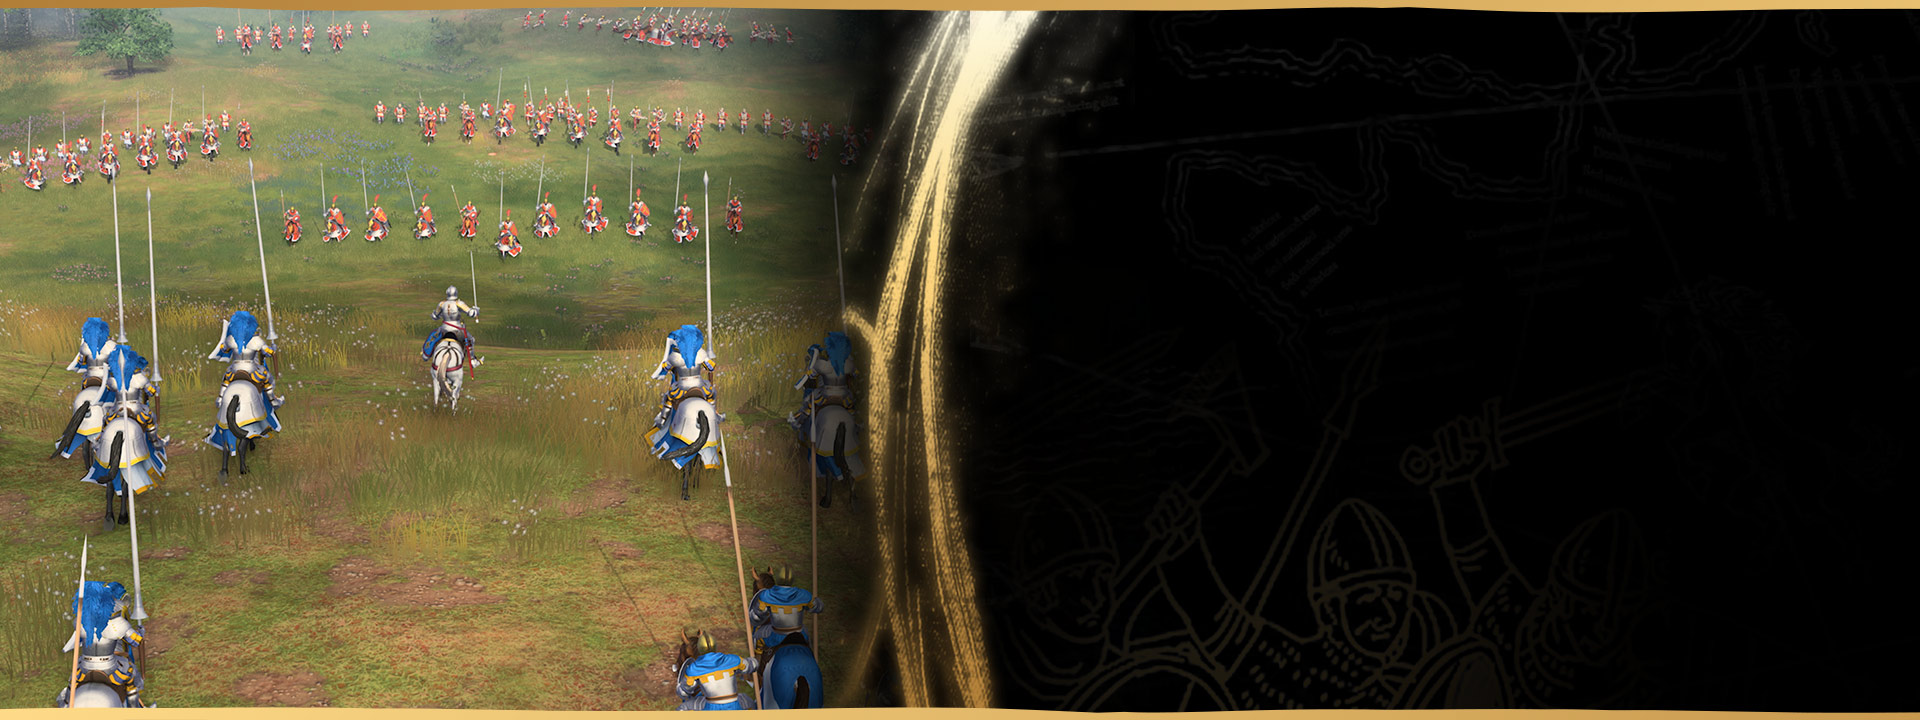 age of empires 4 xbox one release date